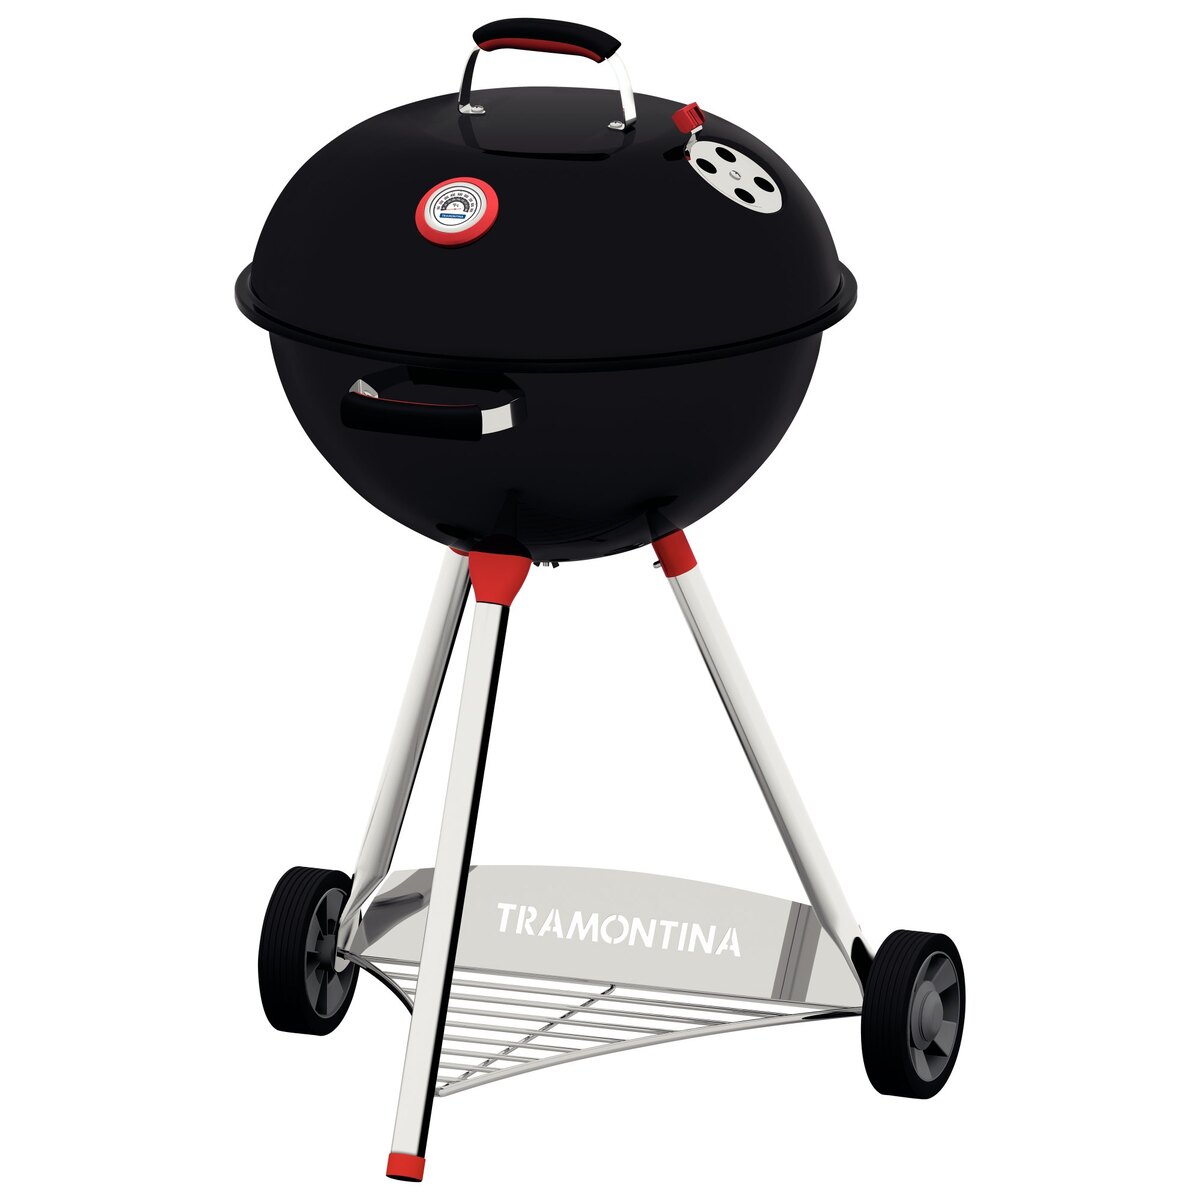 Tramontina Charcoal BBQ Grill Enamelled with Stainless Steel 560Ltr